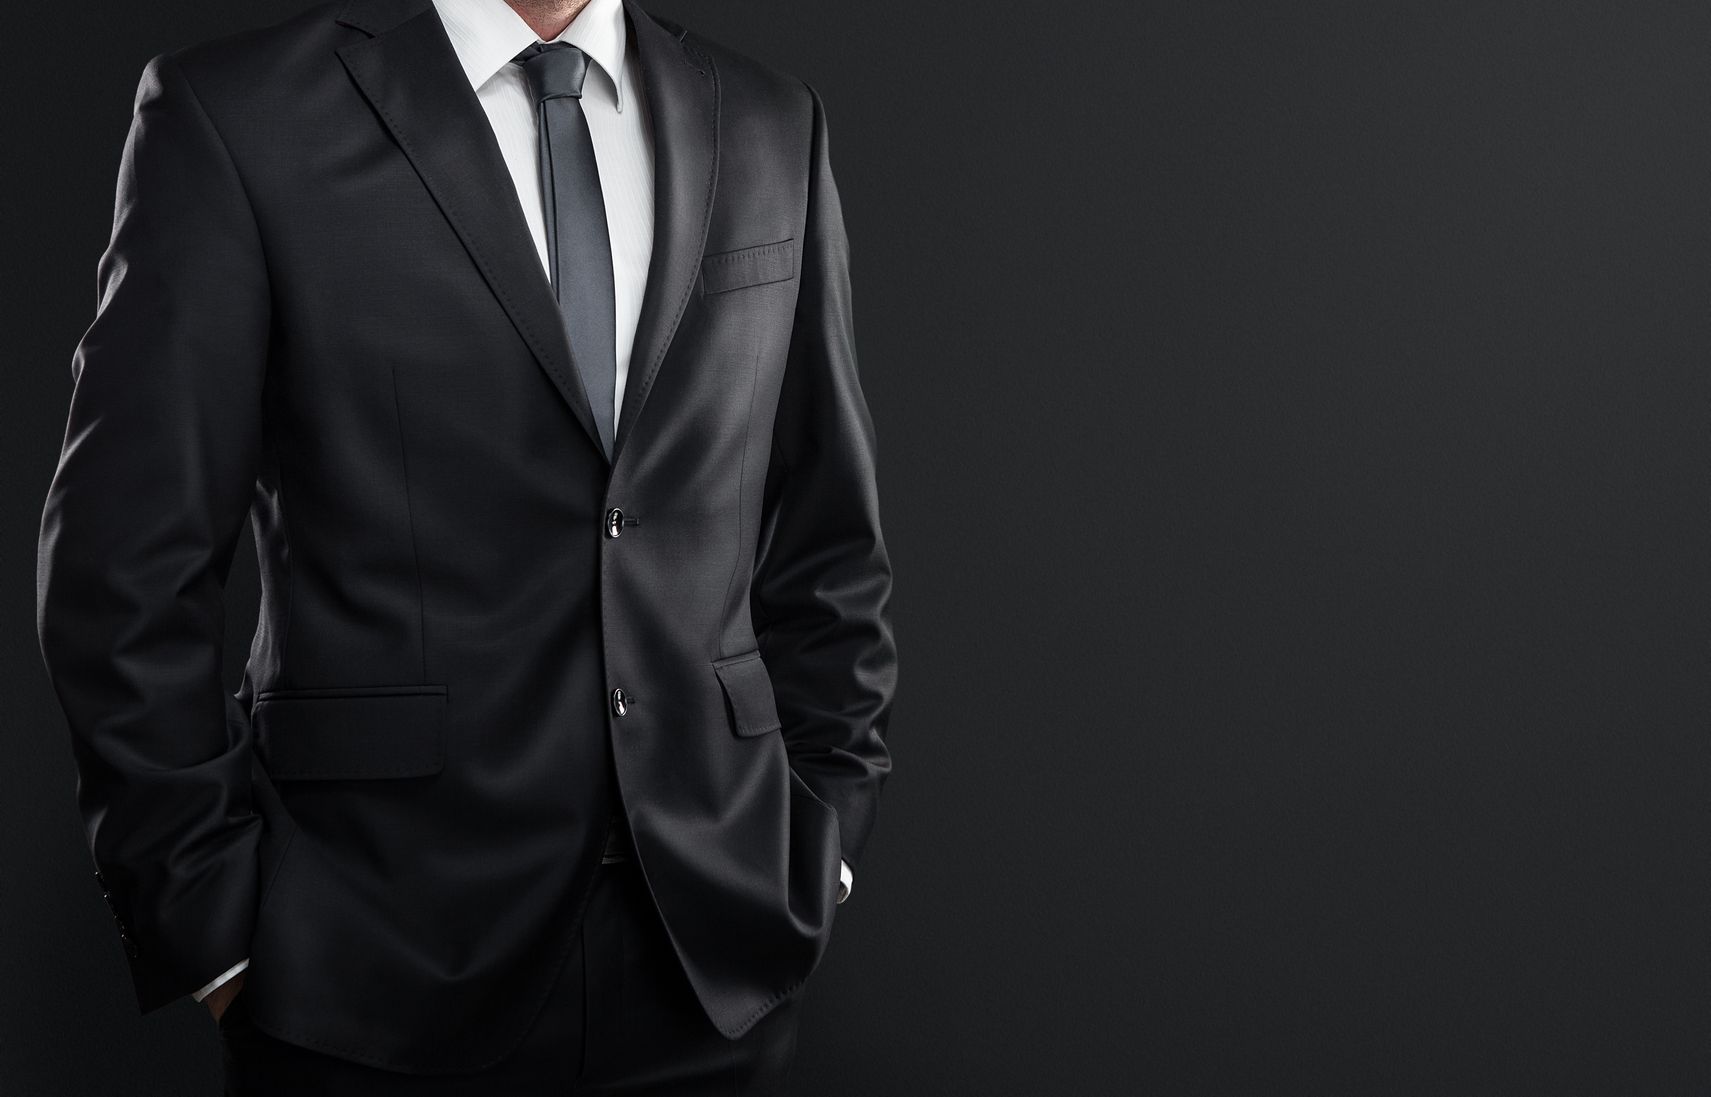 8 Reasons to Consider Custom Suits for a Wedding